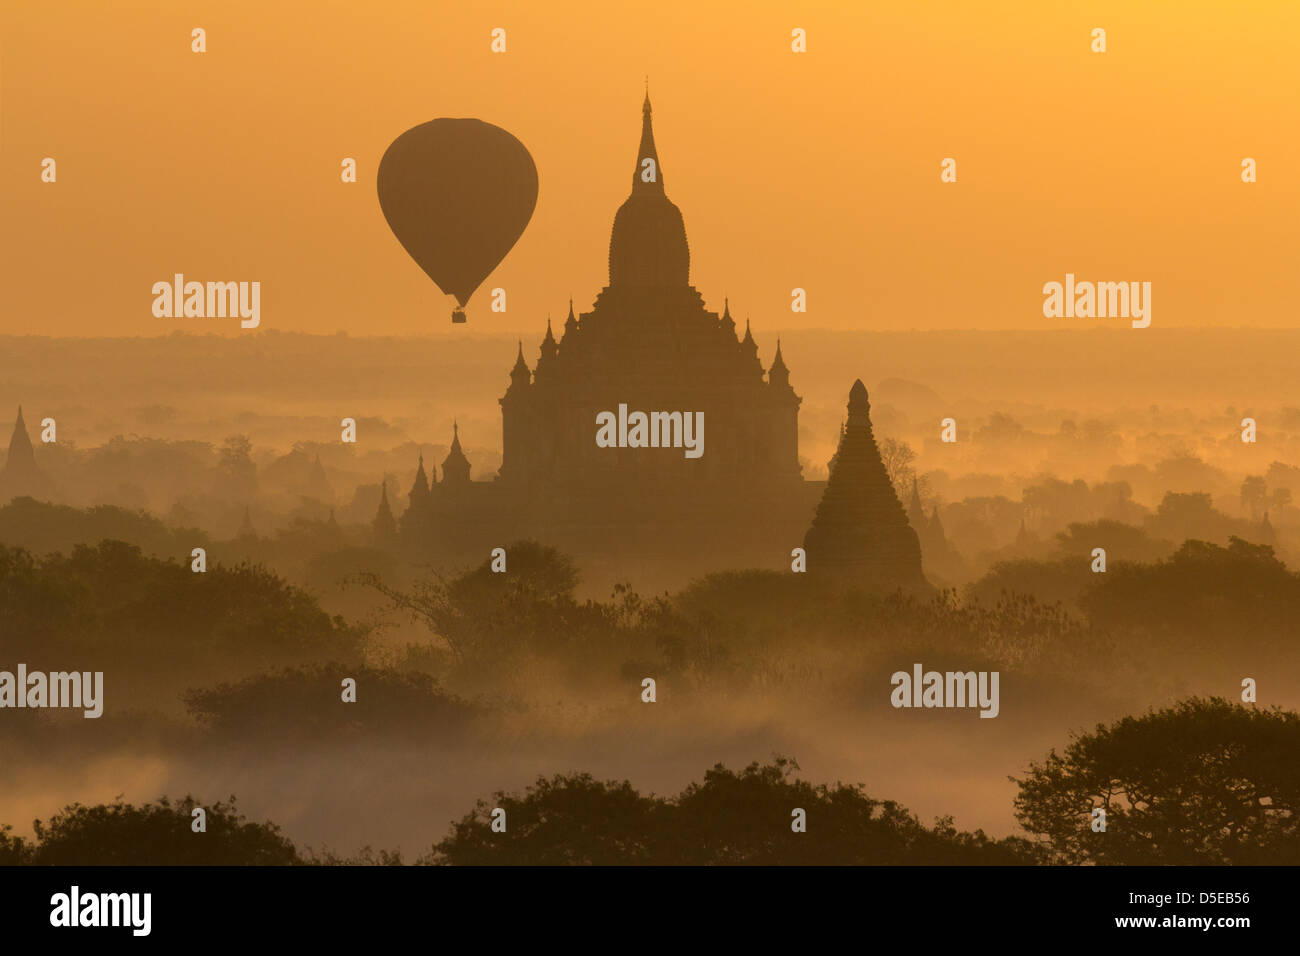 Sunrise with balloons over the pagodas of Bagan, Myanmar 6 Stock Photo